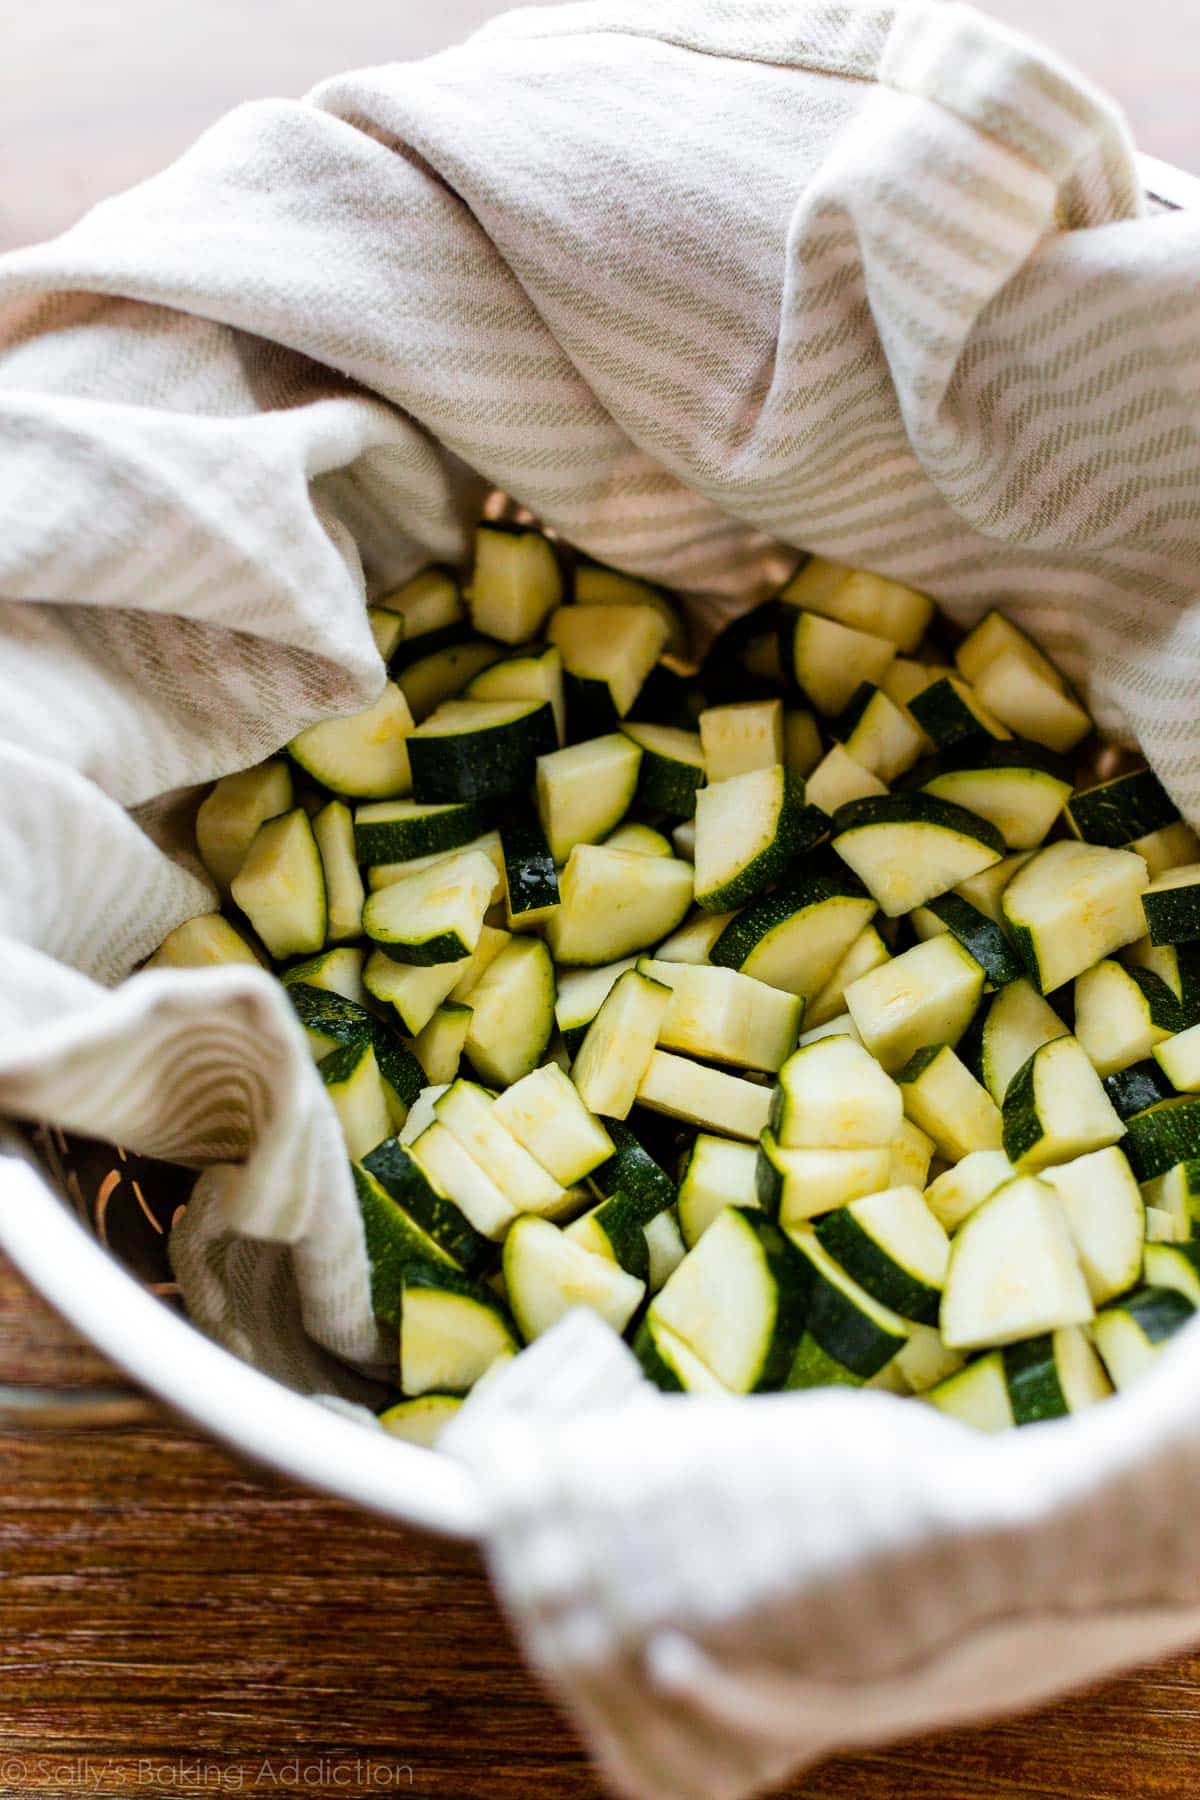 chopped zucchini in towel-lined colander